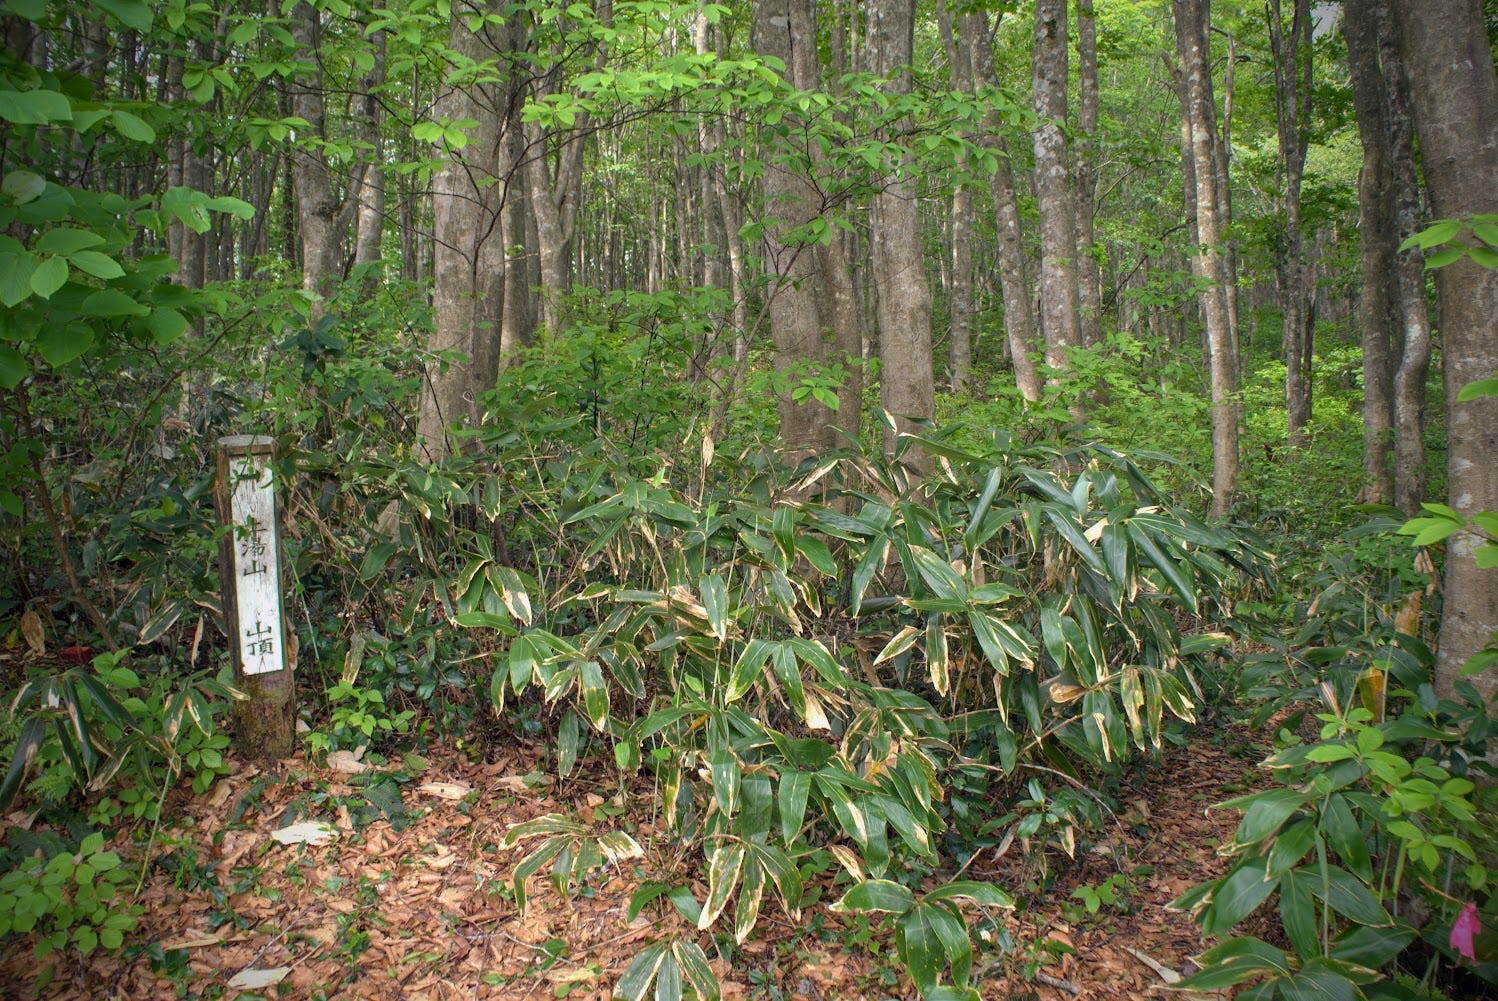 A beech forest with bamboo in the foreground and a sign pointing to the summit of Tsuchiyu-yama